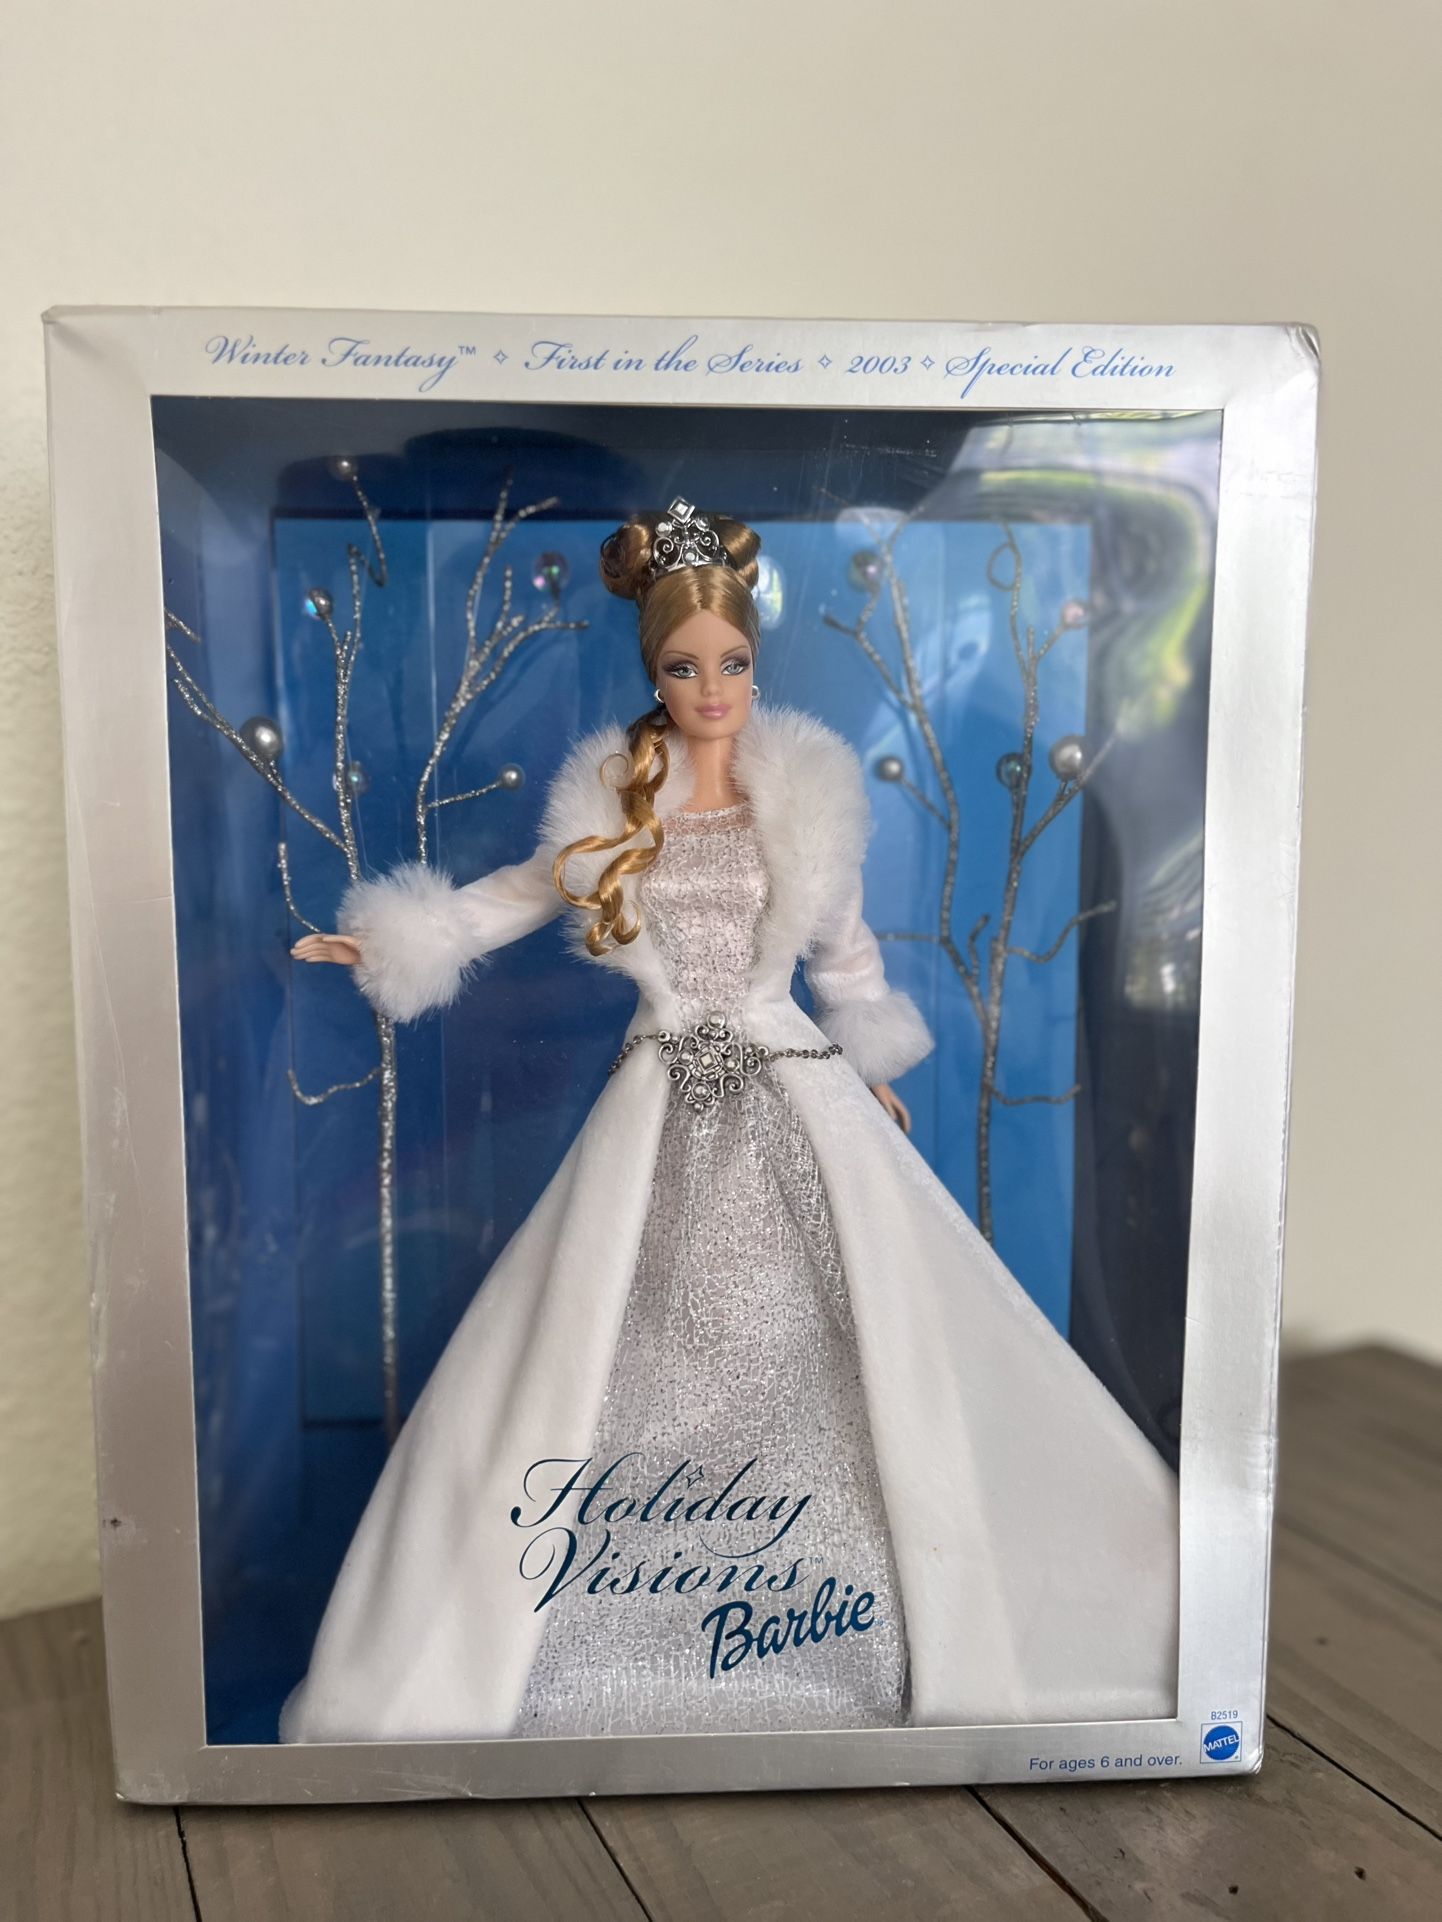 Special Edition Holiday Visions Barbie Doll